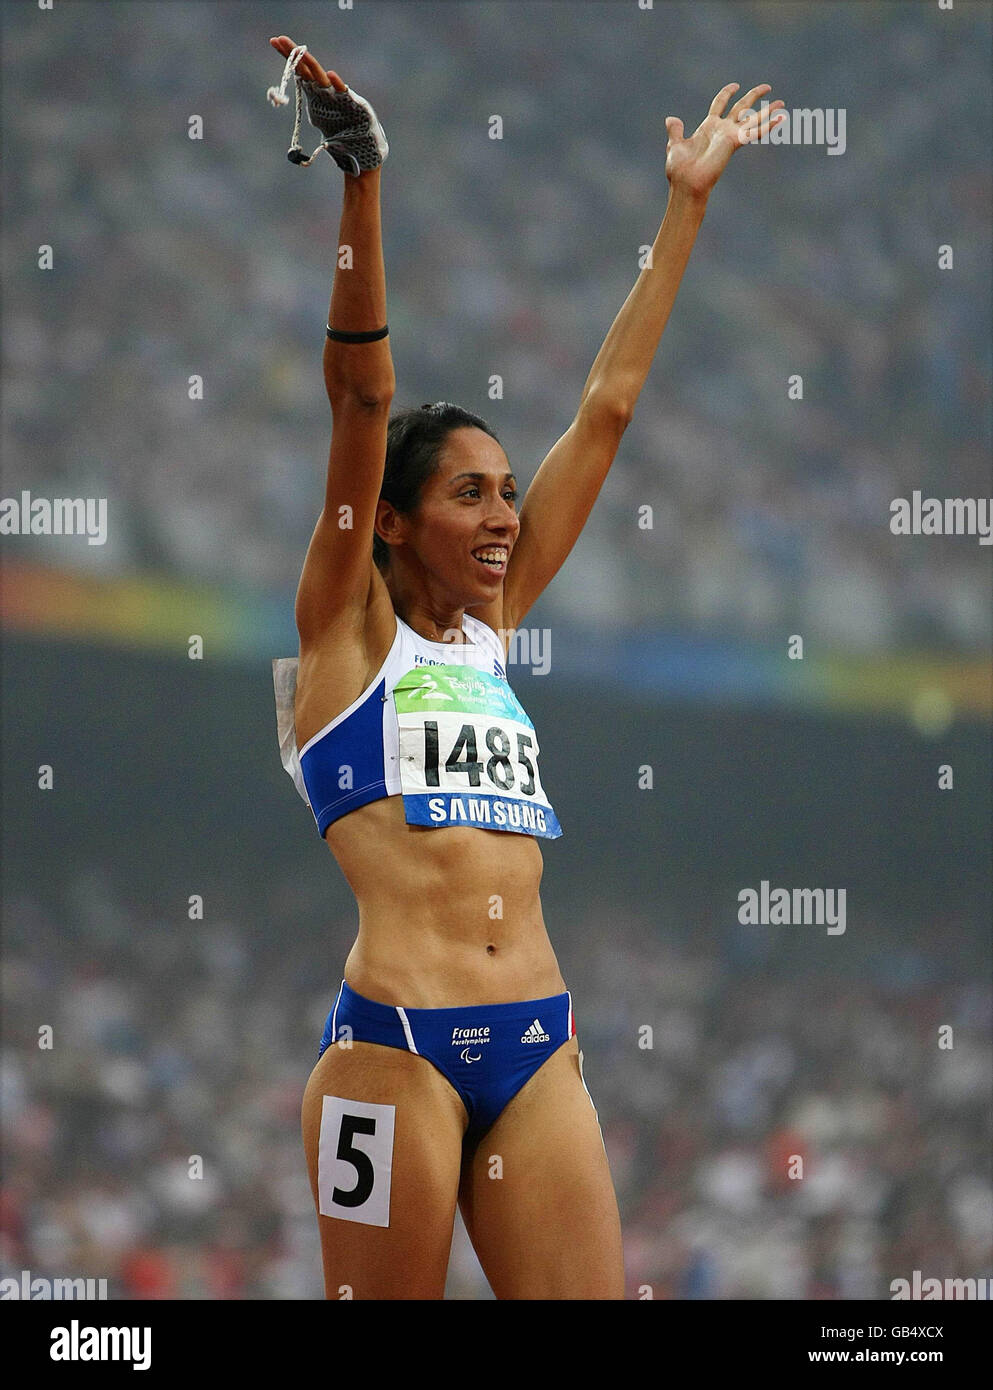 France's Assia El'Hannouni celebrates after winning the Womens 200M T12 Final in the National Stadium, in Beijing, China. Stock Photo